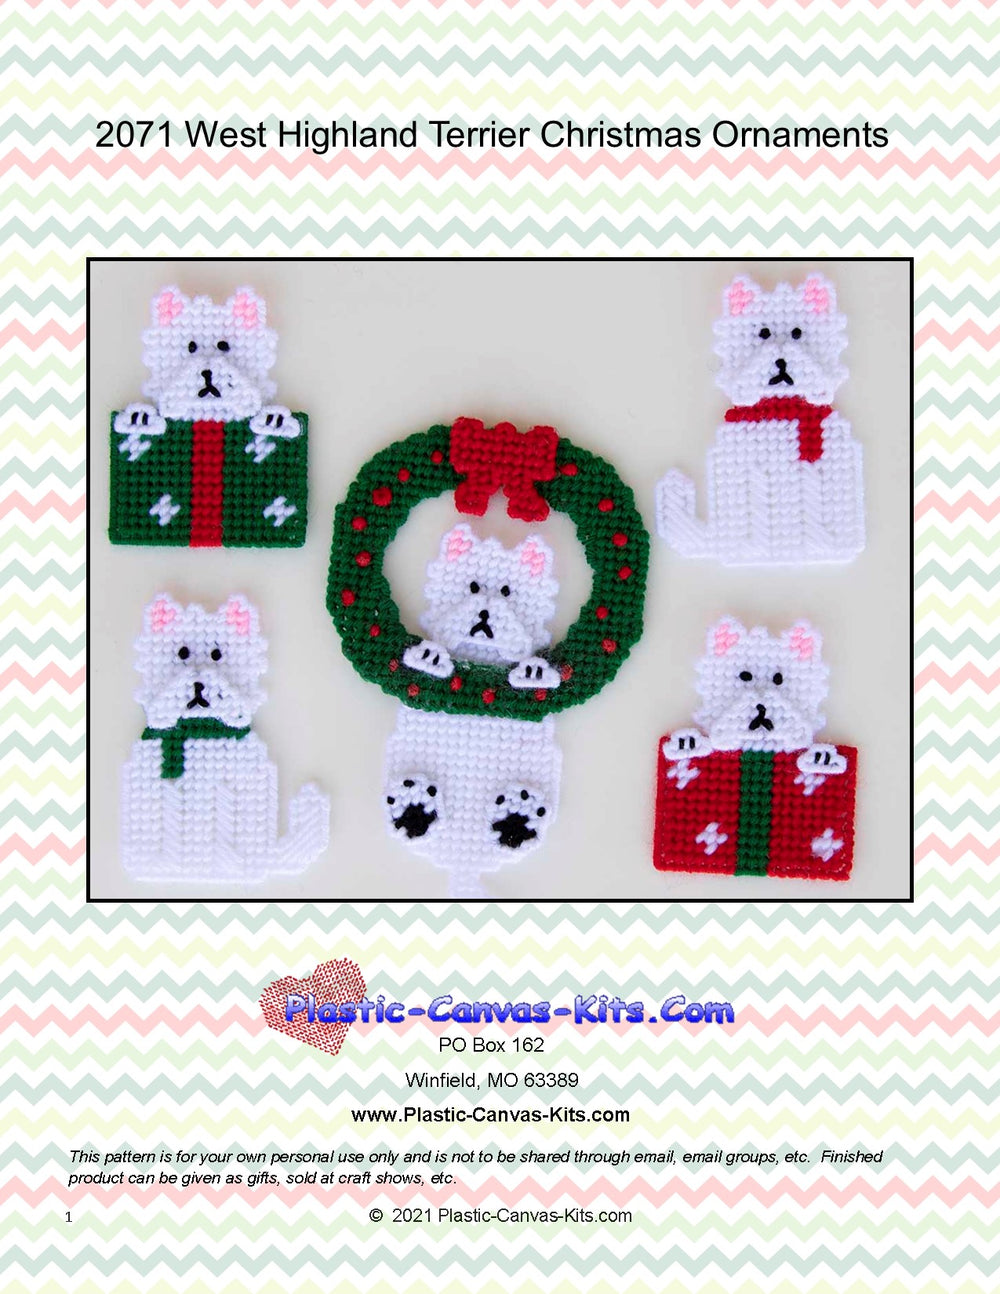 West Highland Terrier Christmas Ornaments